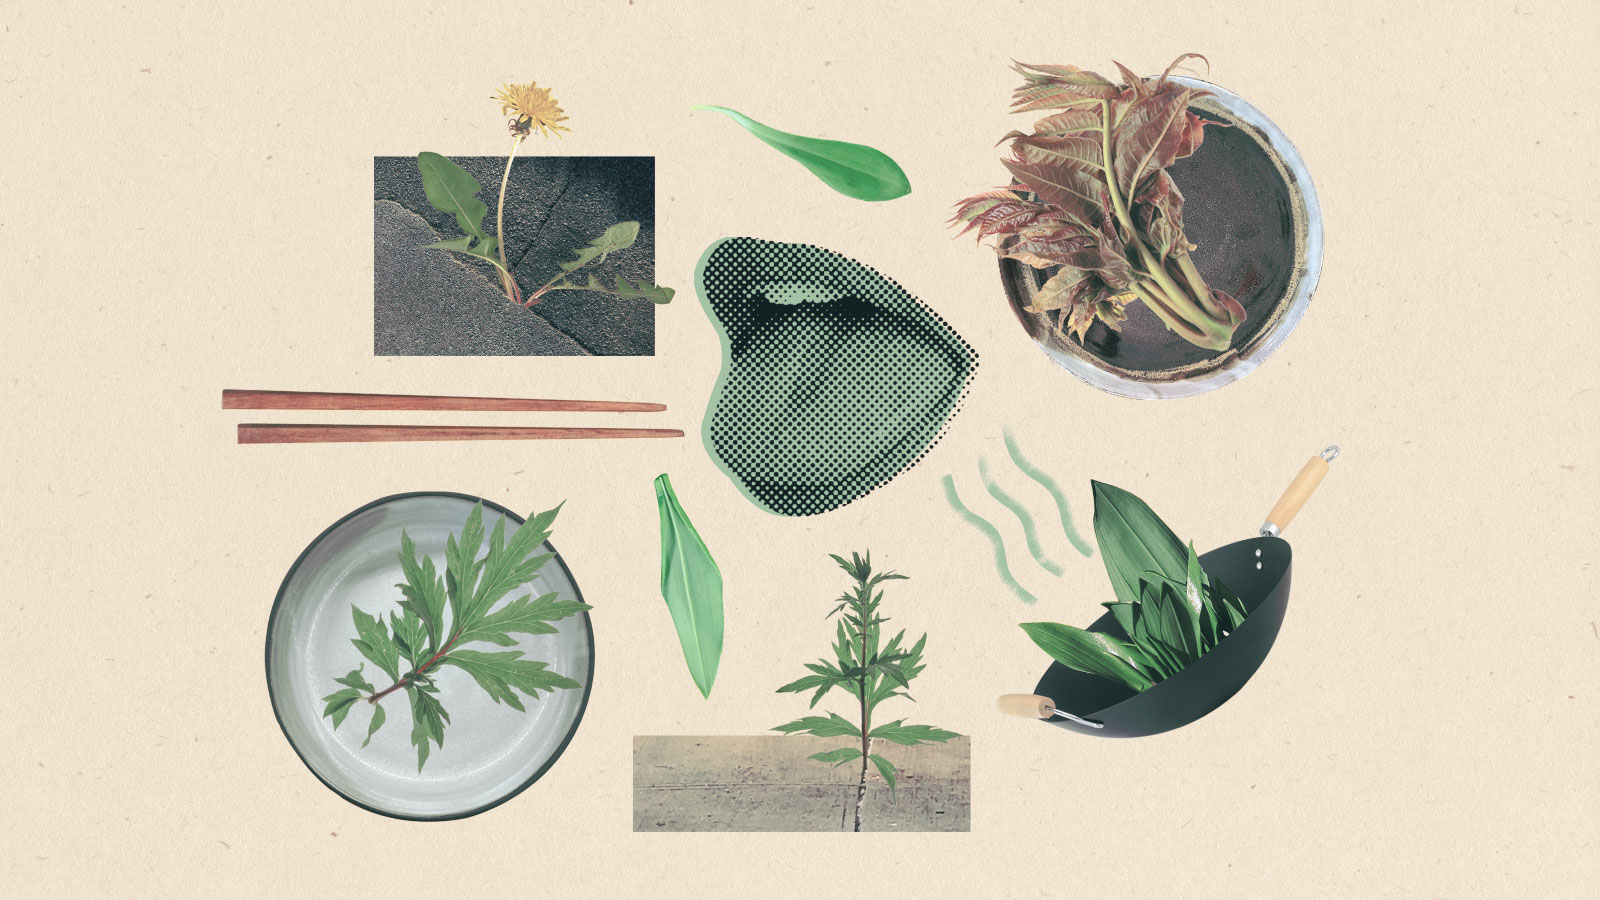 Collage: an open mouth surrounded by leaves, chopsticks, plates with leafy greens on them, plants growing up from cracks in sidewalks, and a wok with a pile of leaves inside it